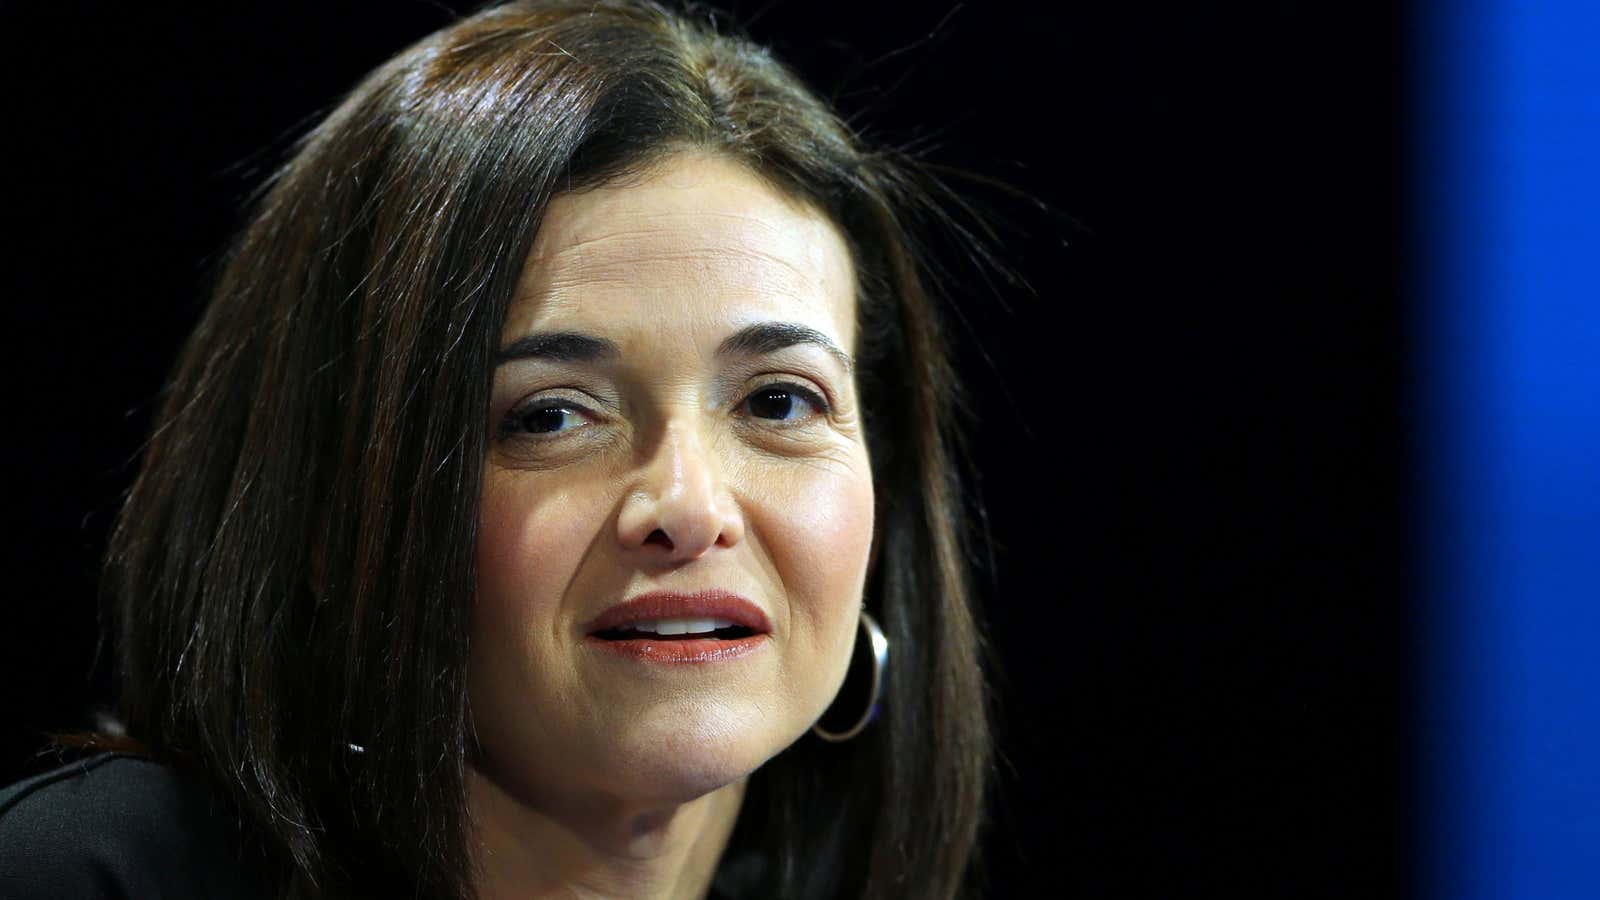 Facebook COO Sheryl Sandberg: Still the most powerful woman in Silicon Valley.